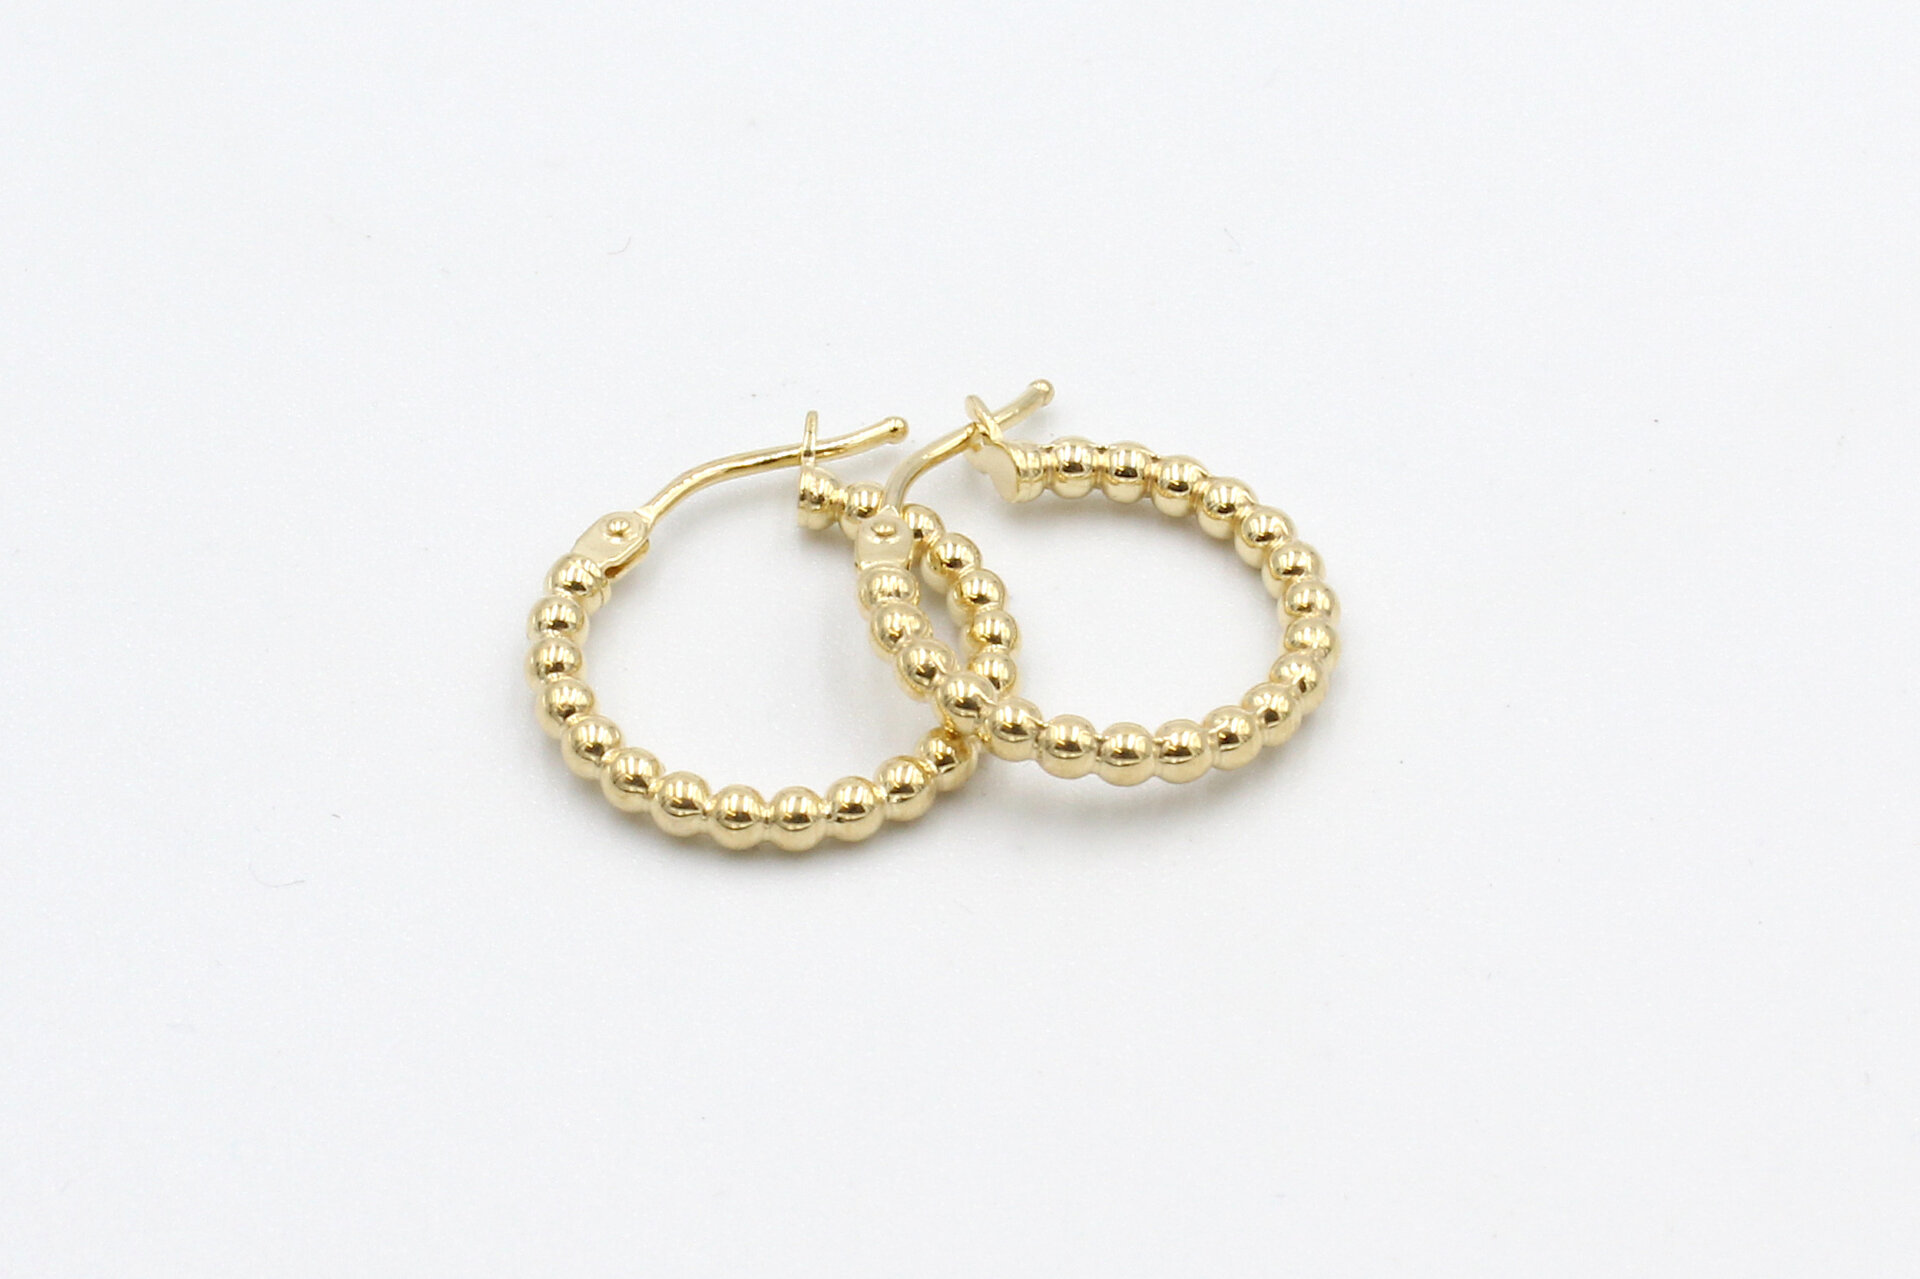 a loose set of gold hoop earrings on a white background